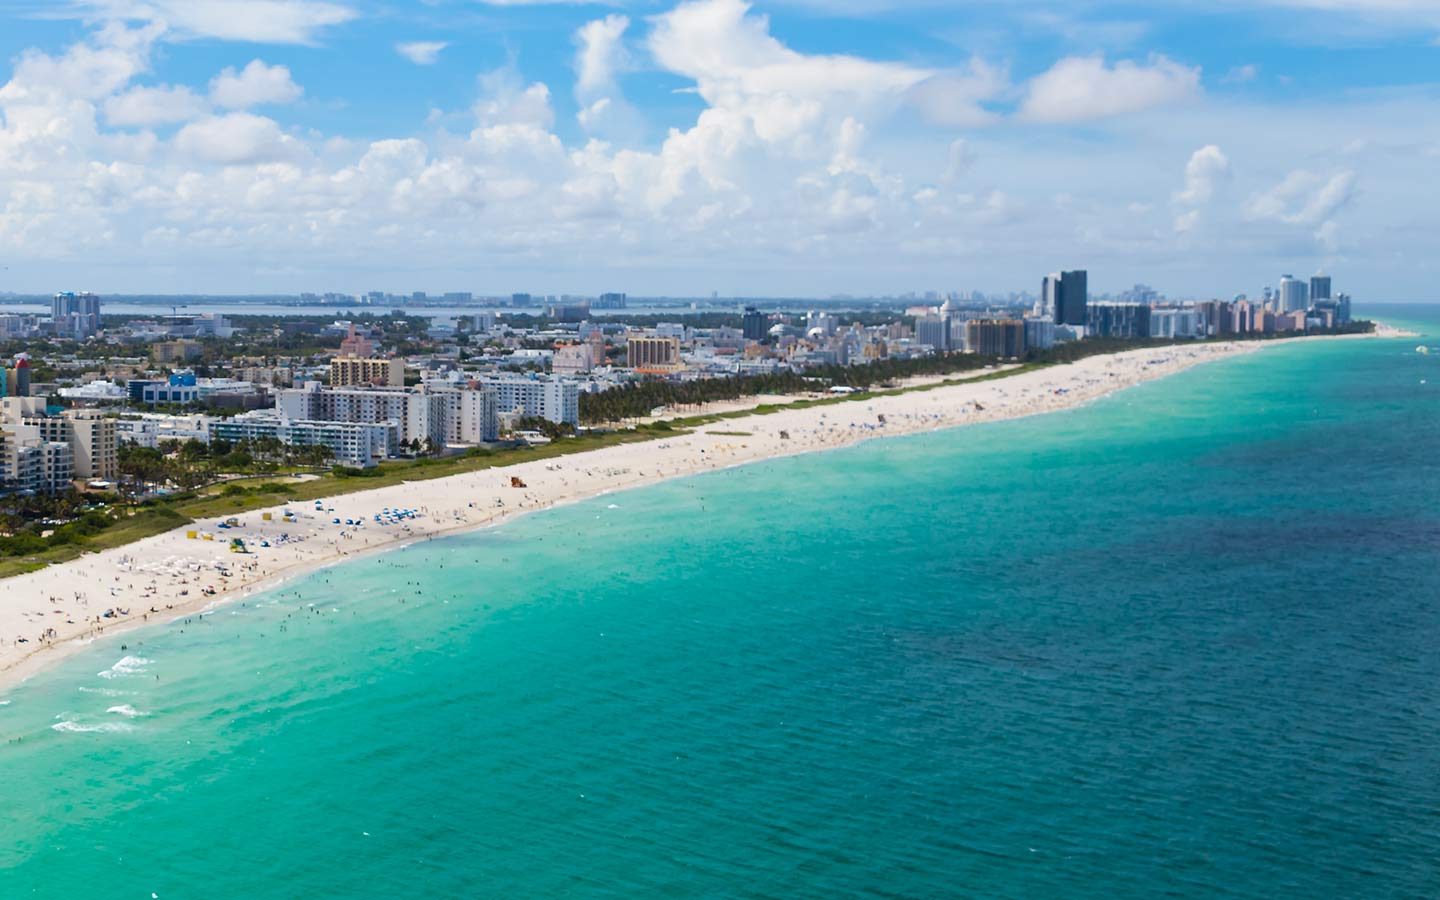 Aerial view of South Beach from the ocean